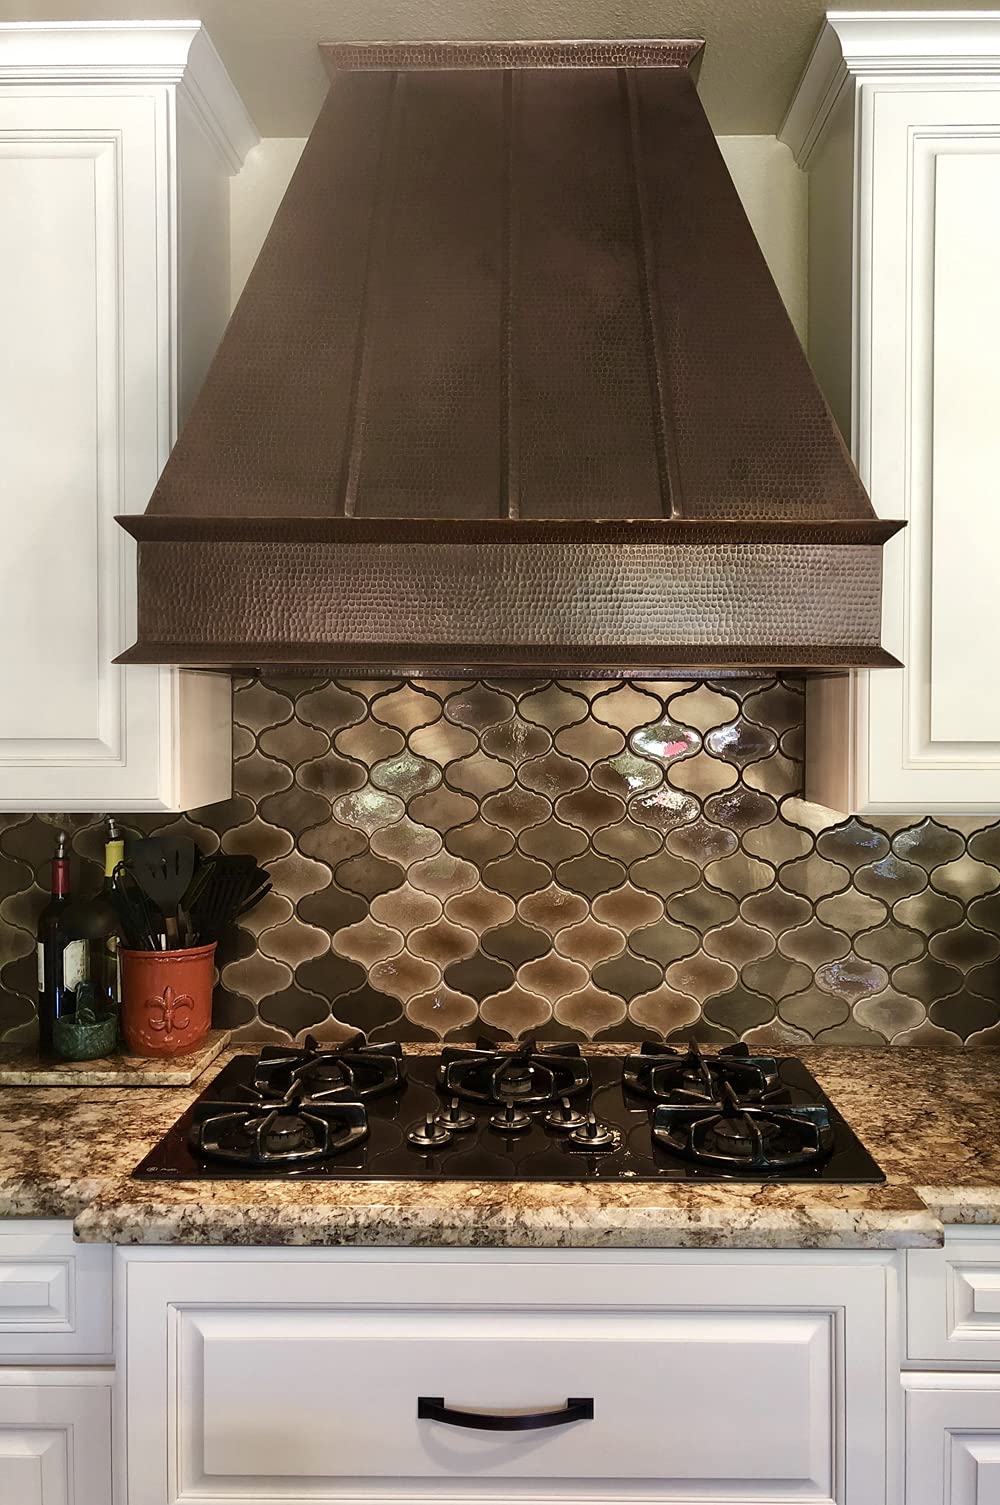 38 Inch 1250 CFM Hammered Copper Wall Mounted Euro Range Hood with Slim Baffle Filters